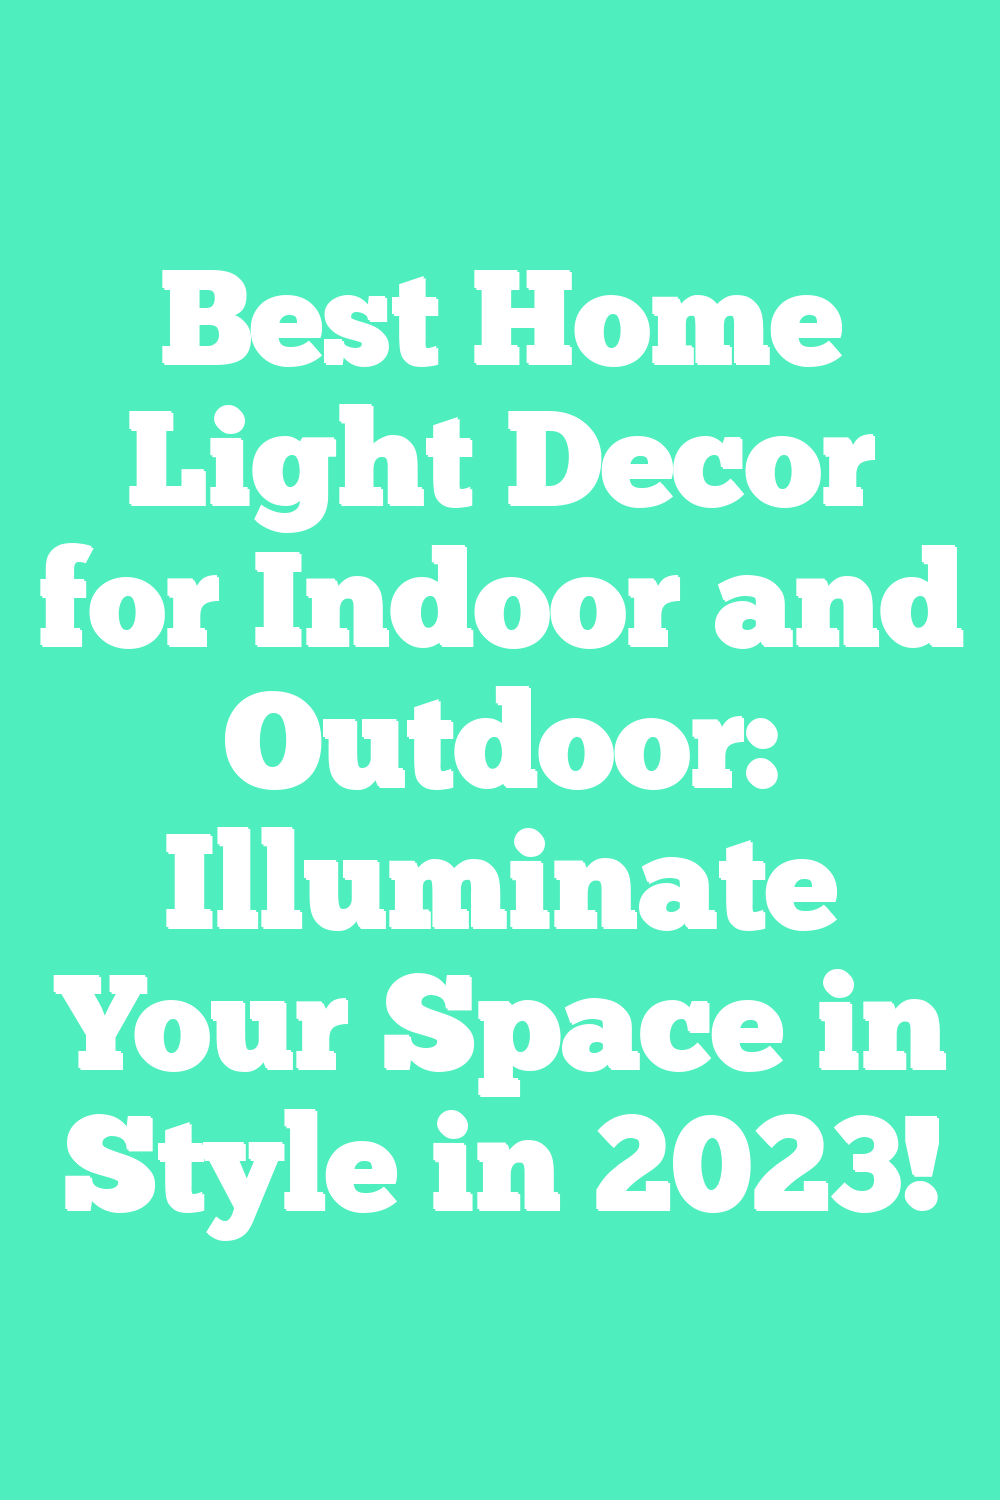 Best Home Light Decor for Indoor and Outdoor: Illuminate Your Space in Style in 2023!